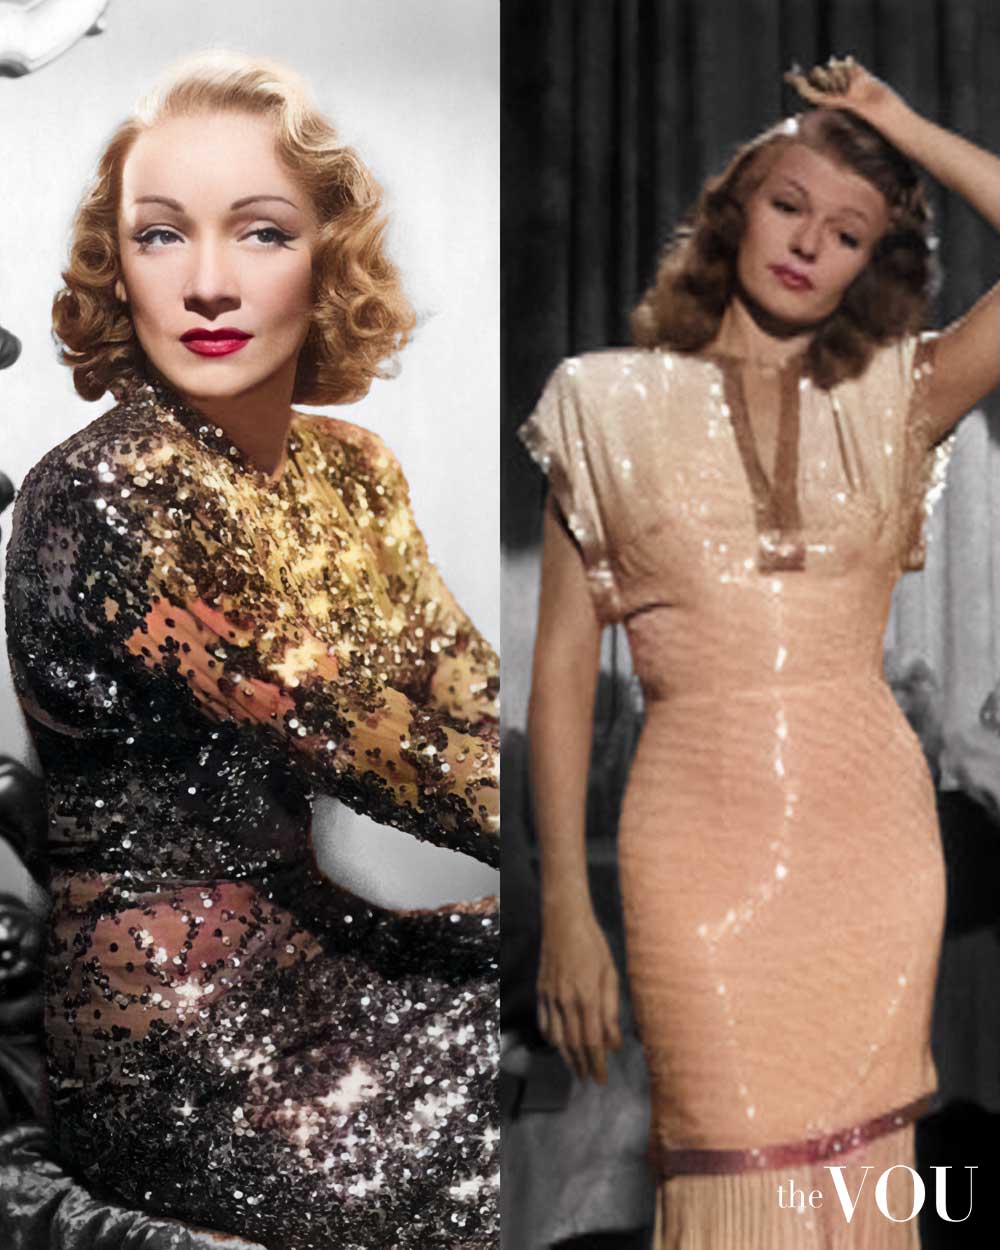 Sequins in the 1940s fashion